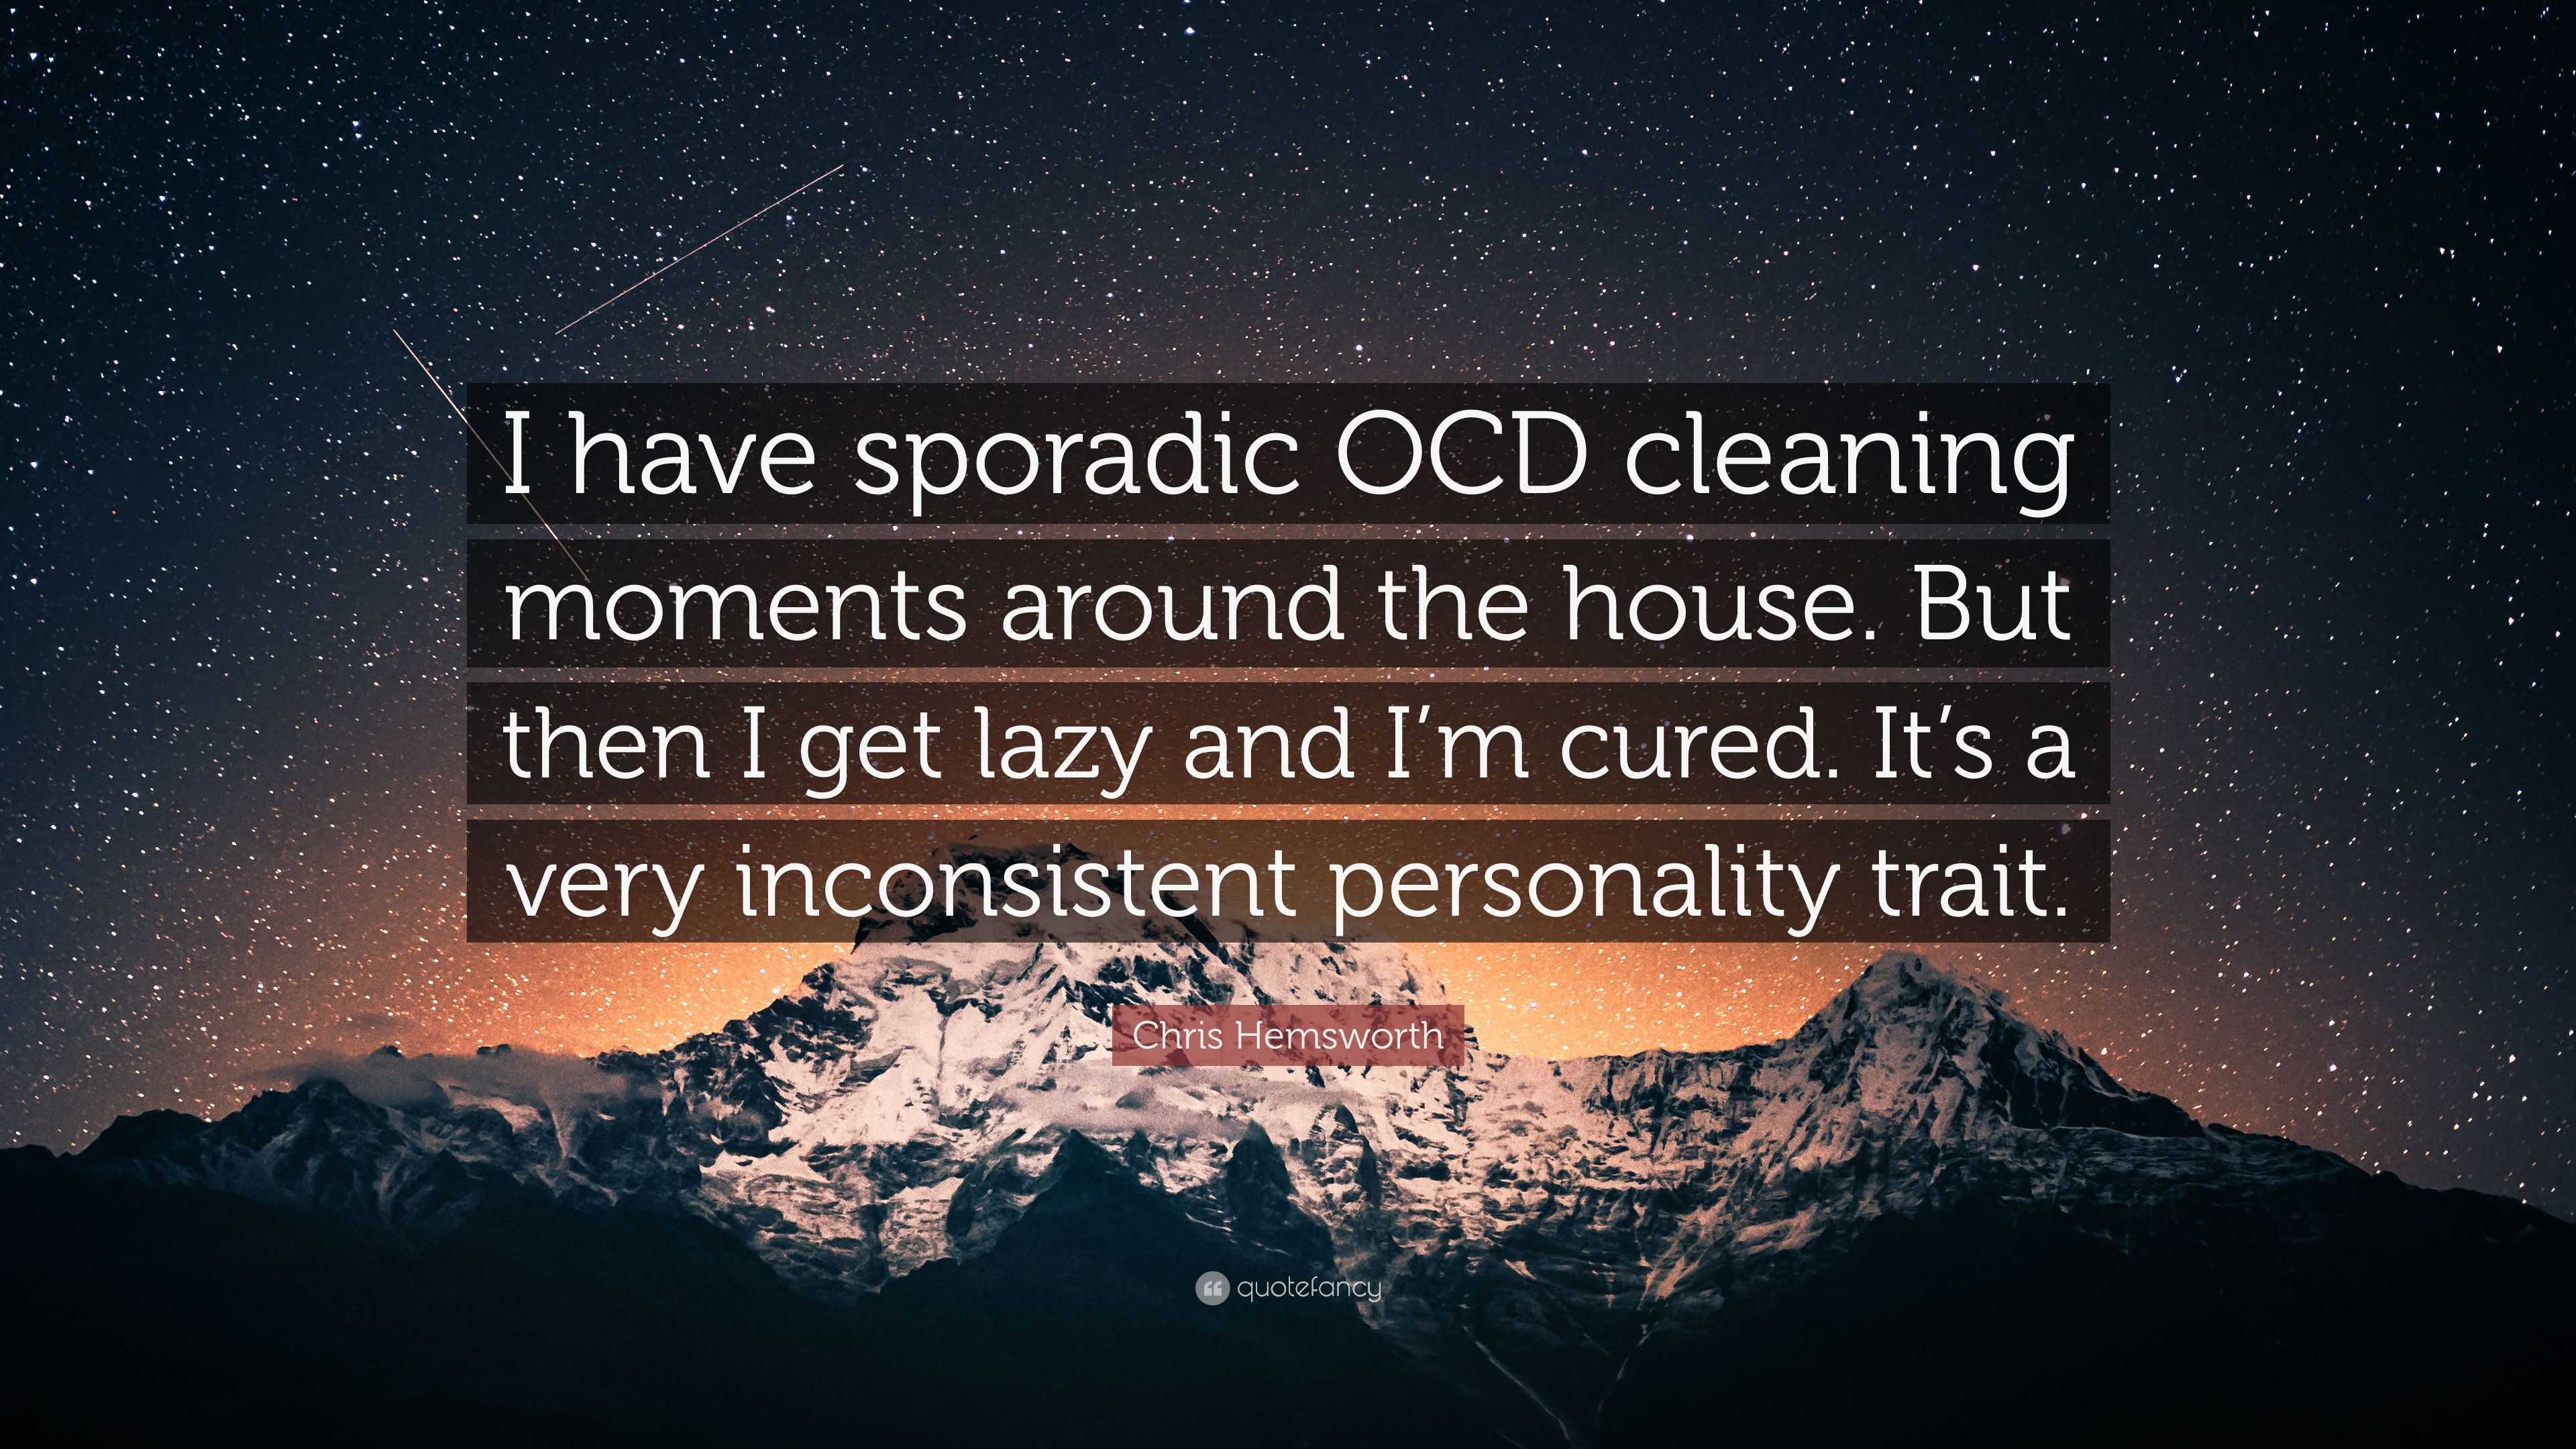 Chris Hemsworth Quote: “I have sporadic OCD cleaning moments around the  house. But then I get lazy and I'm cured. It's a very inconsistent perso...”